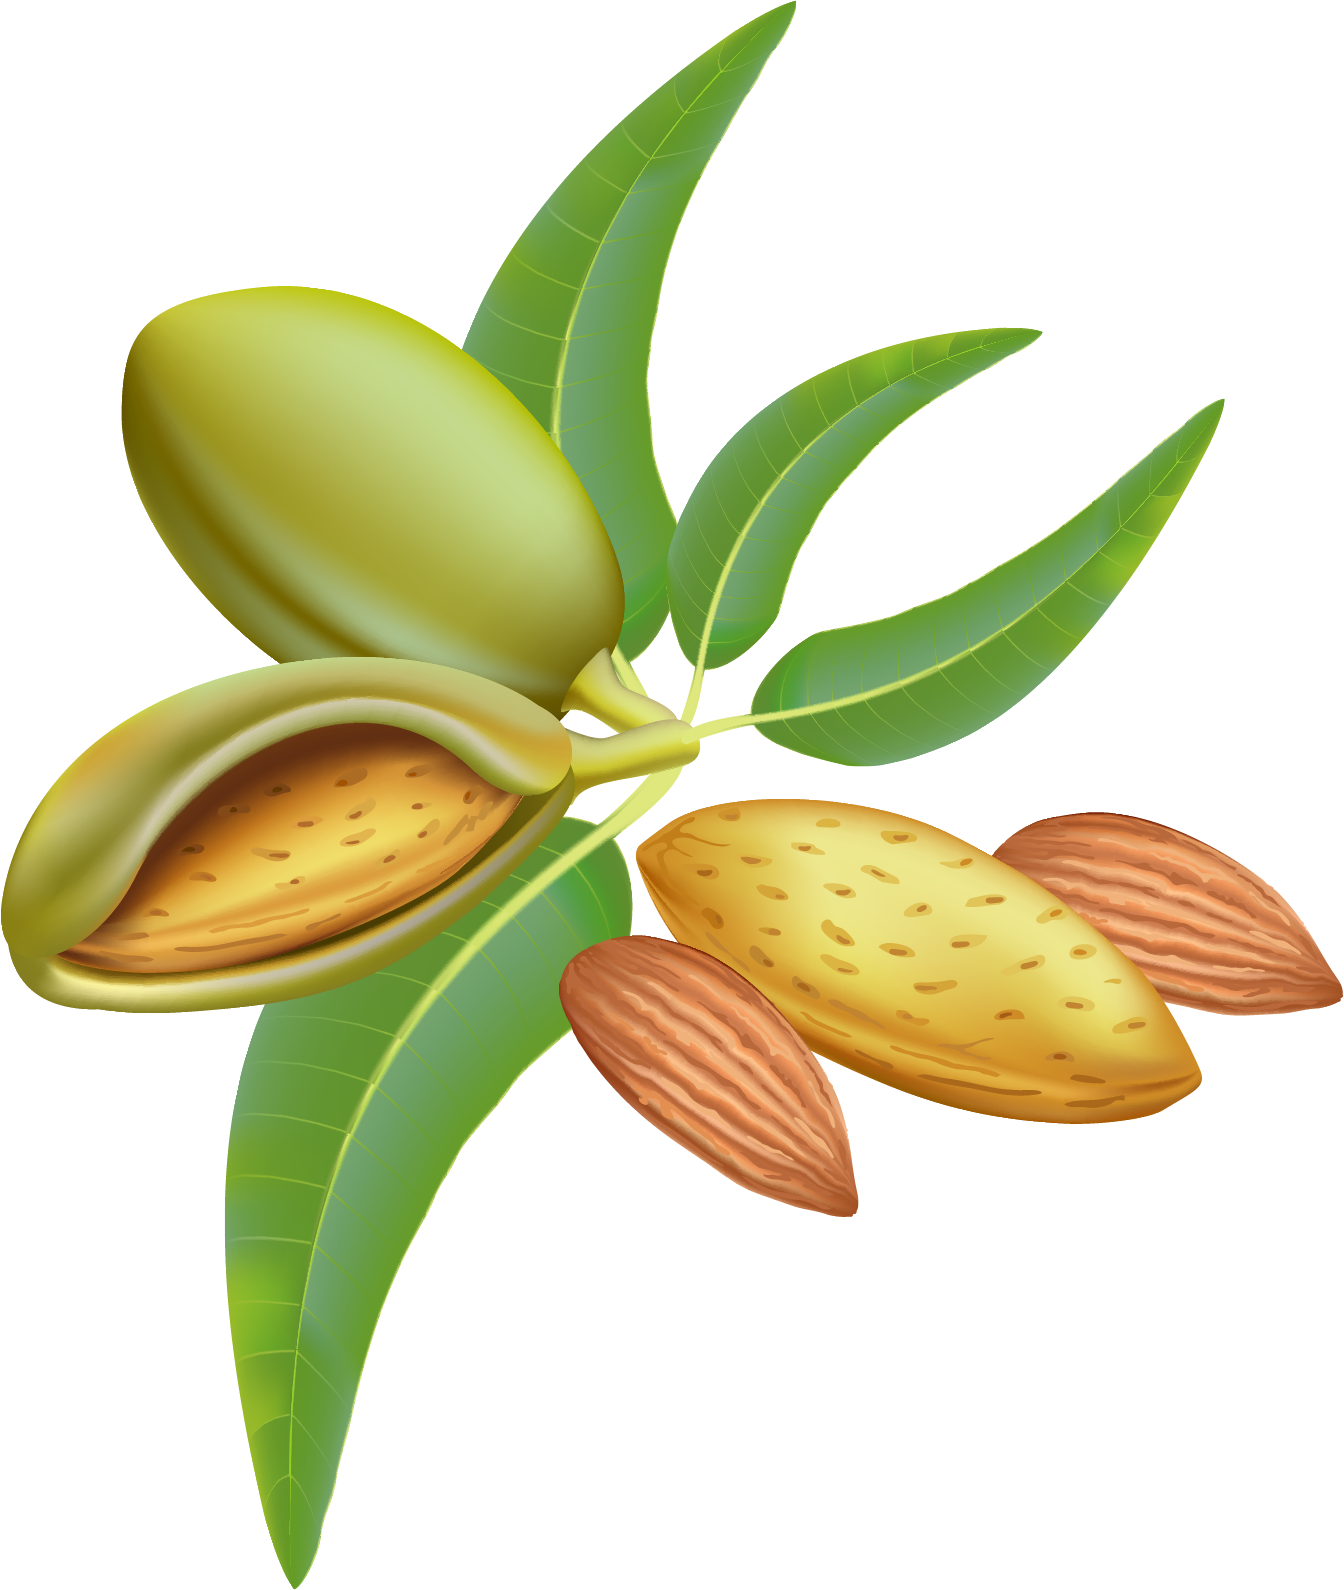 Almond Free PNG Images, Almond Tree Clipart Download - Free - Clip Art ...